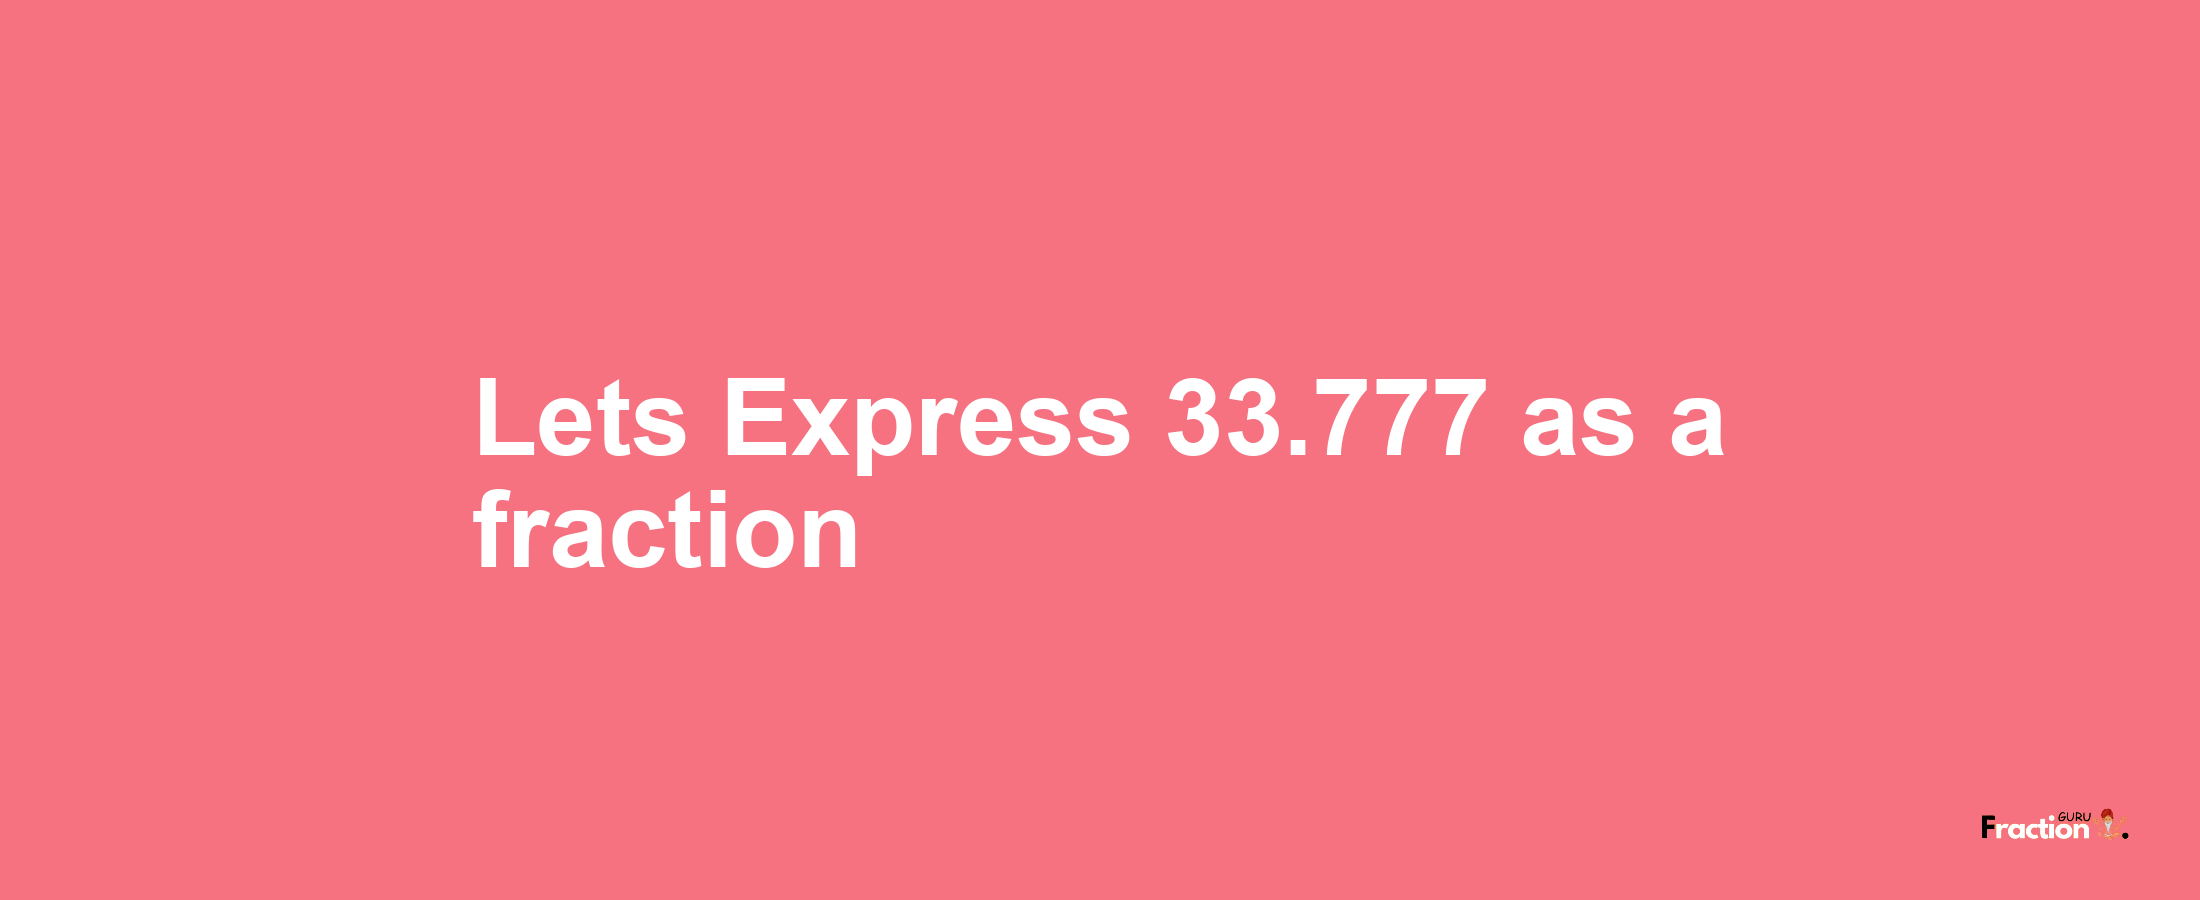 Lets Express 33.777 as afraction